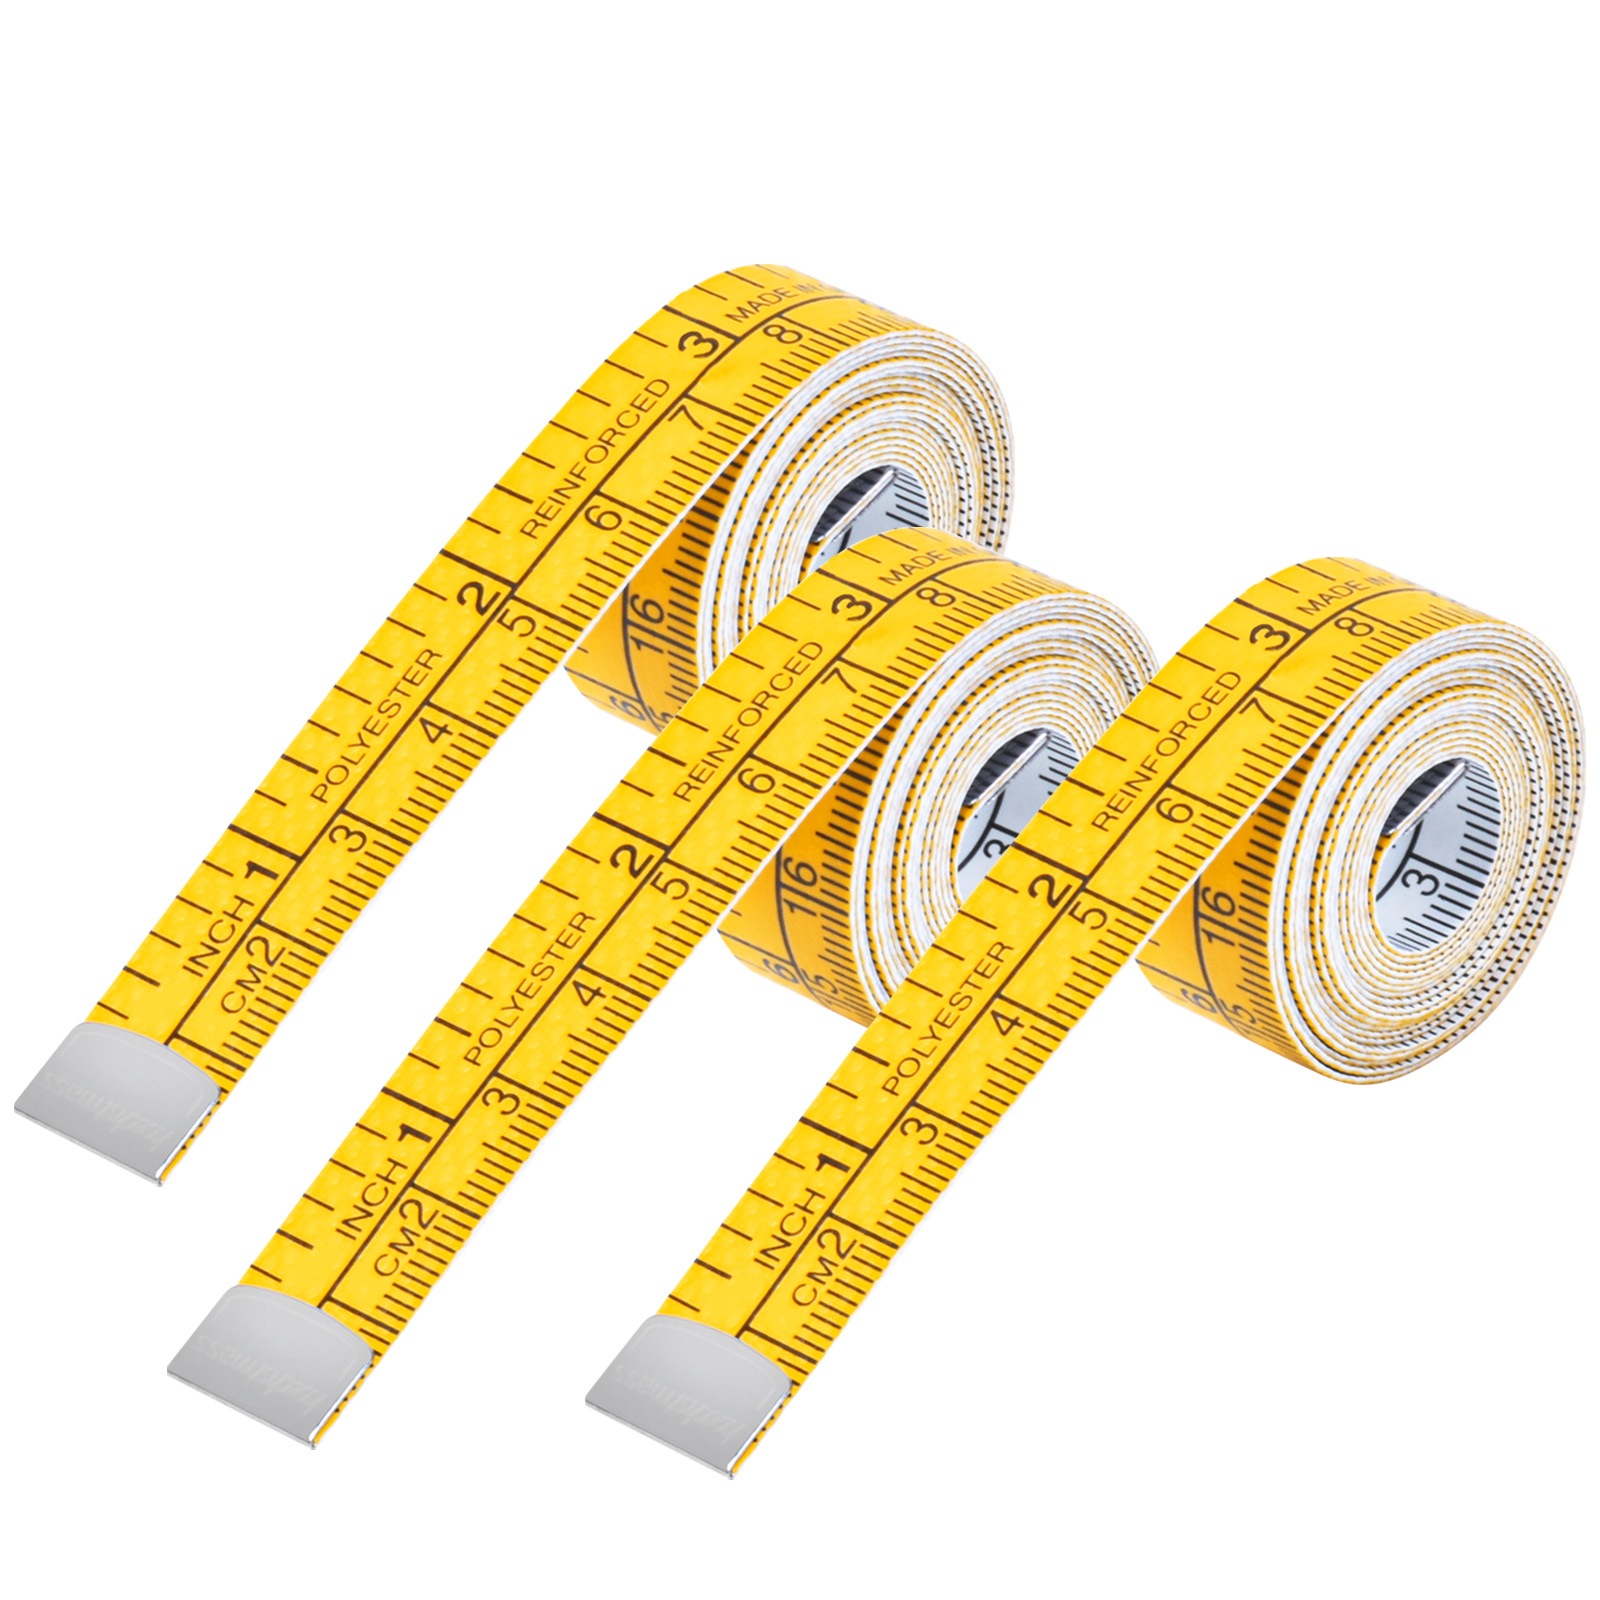 Soft Tape Measure Measuring Tape for Body Measurements,Double